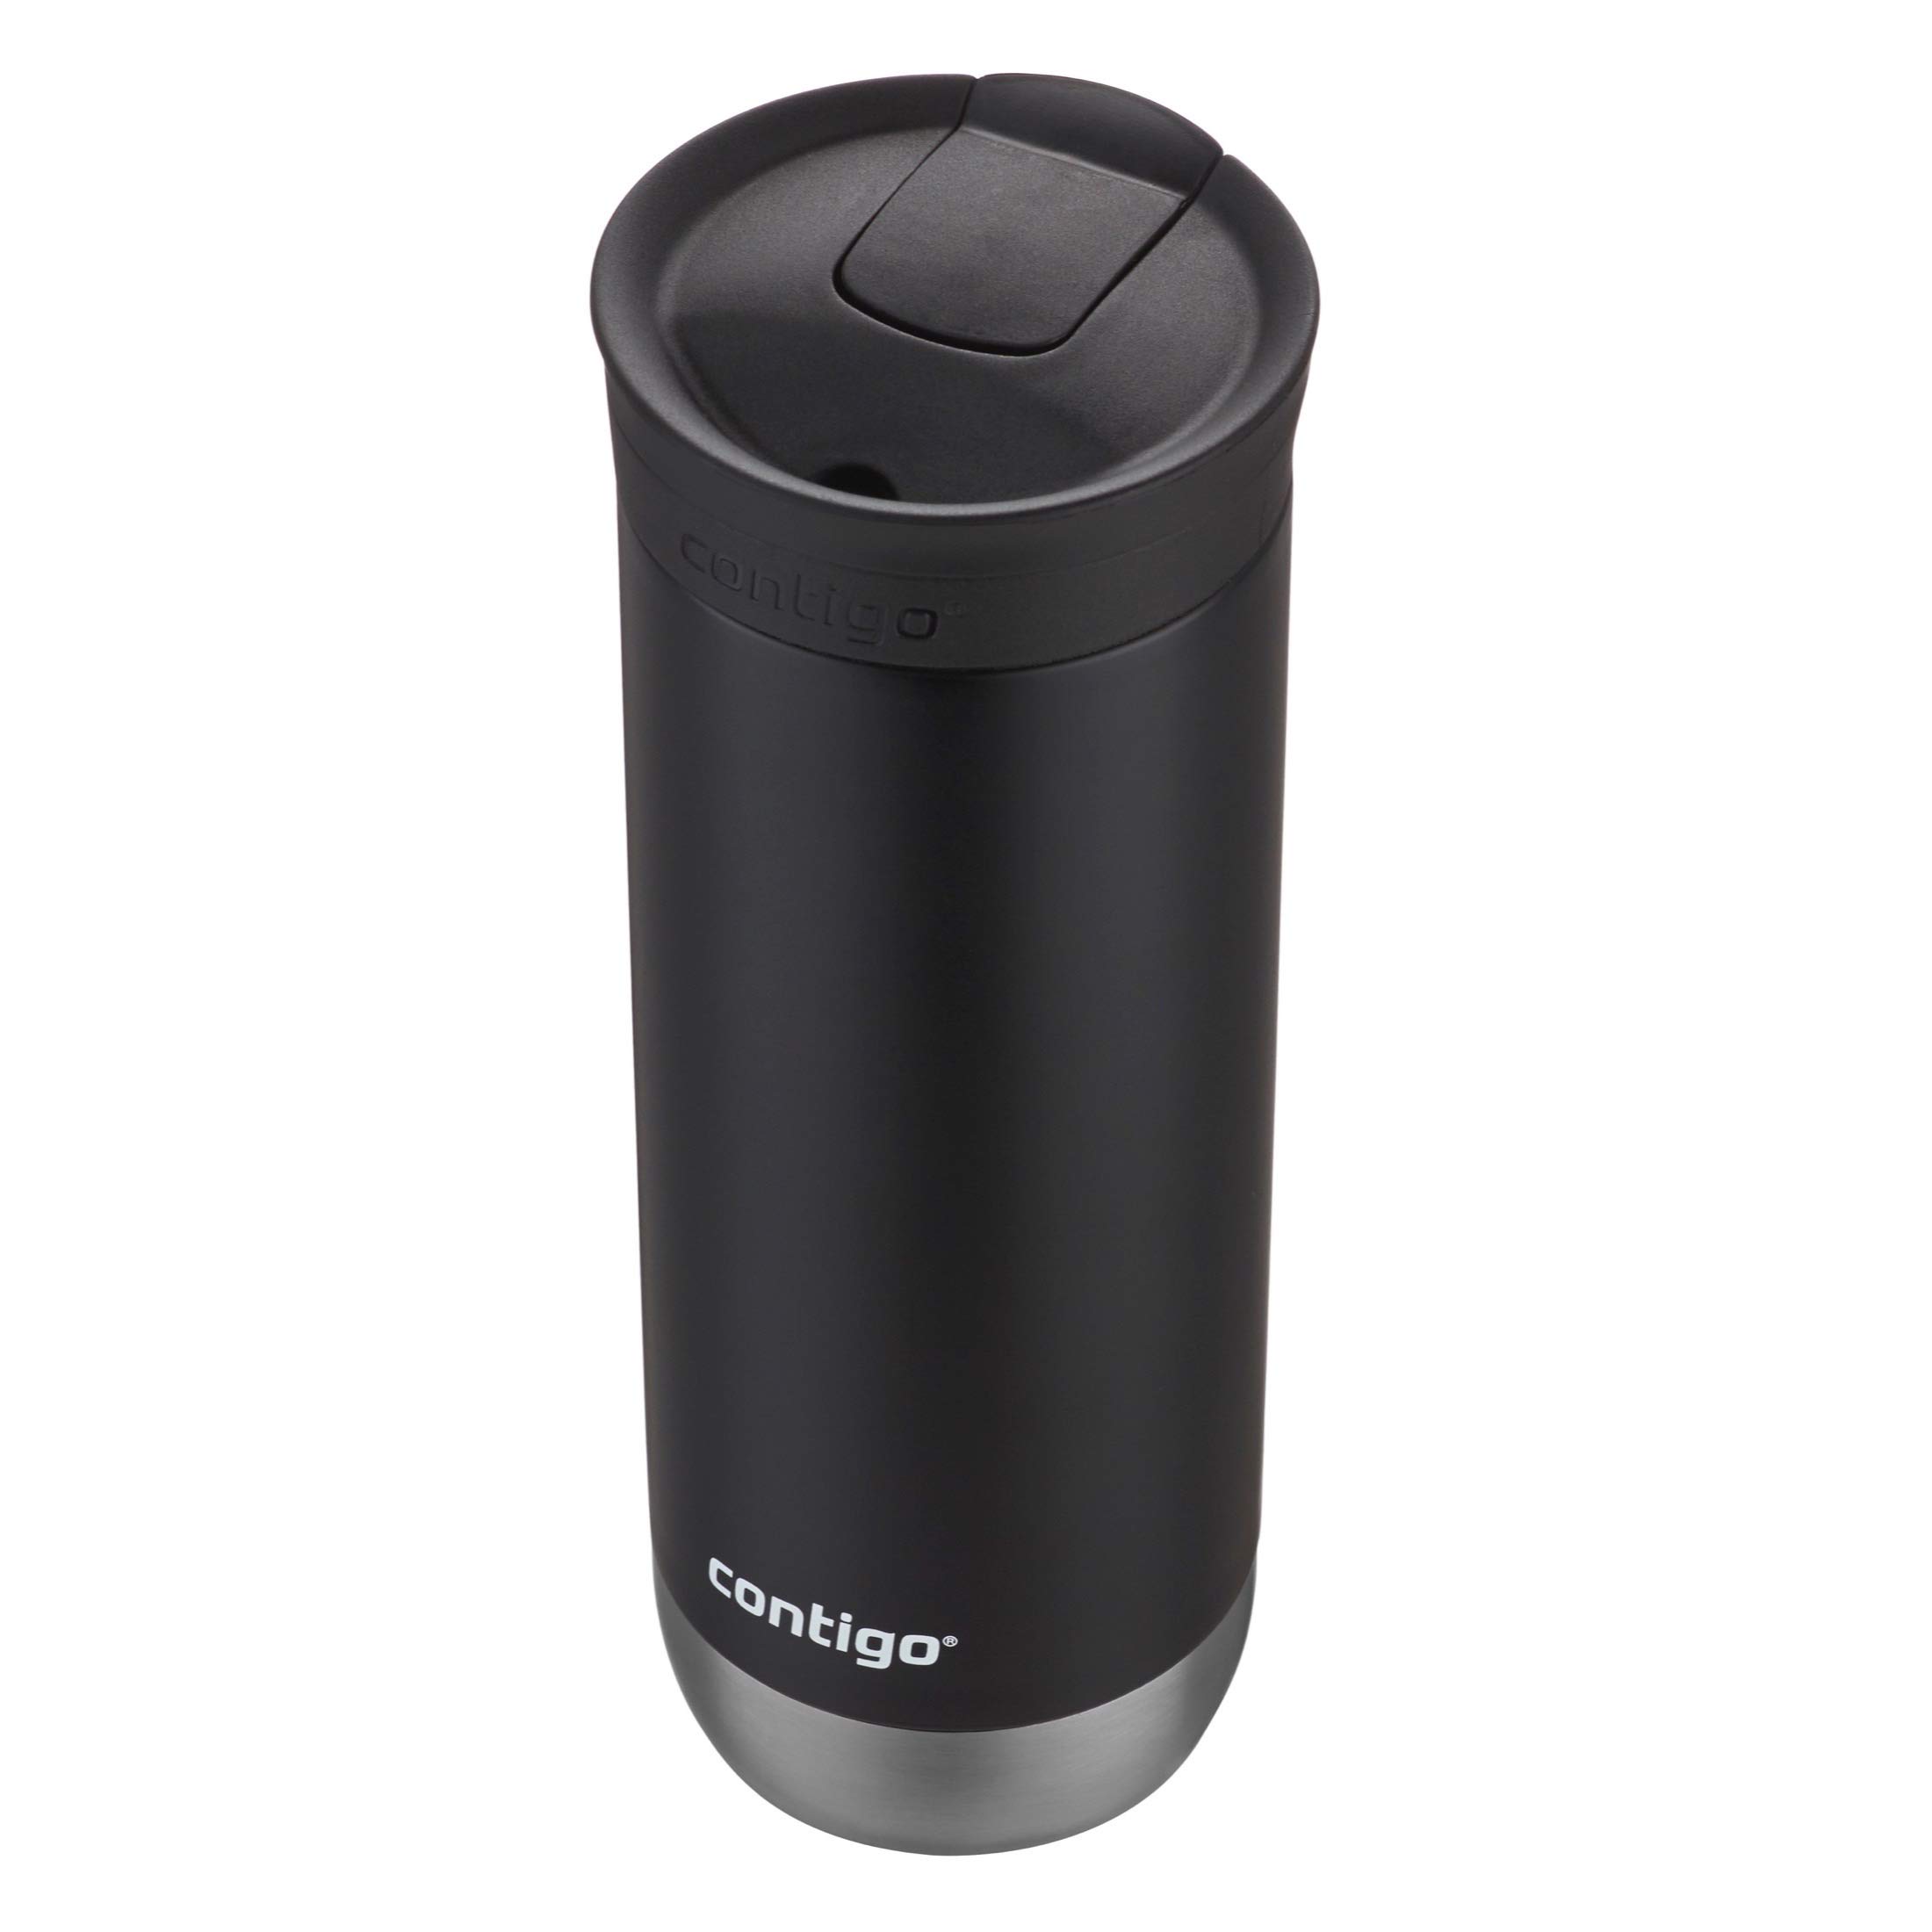 Contigo Huron Vacuum-Insulated Stainless Steel Travel Mug with Leak-Proof Lid, Keeps Drinks Hot or Cold for Hours, Fits Most Cup Holders and Brewers, 20oz Licorice